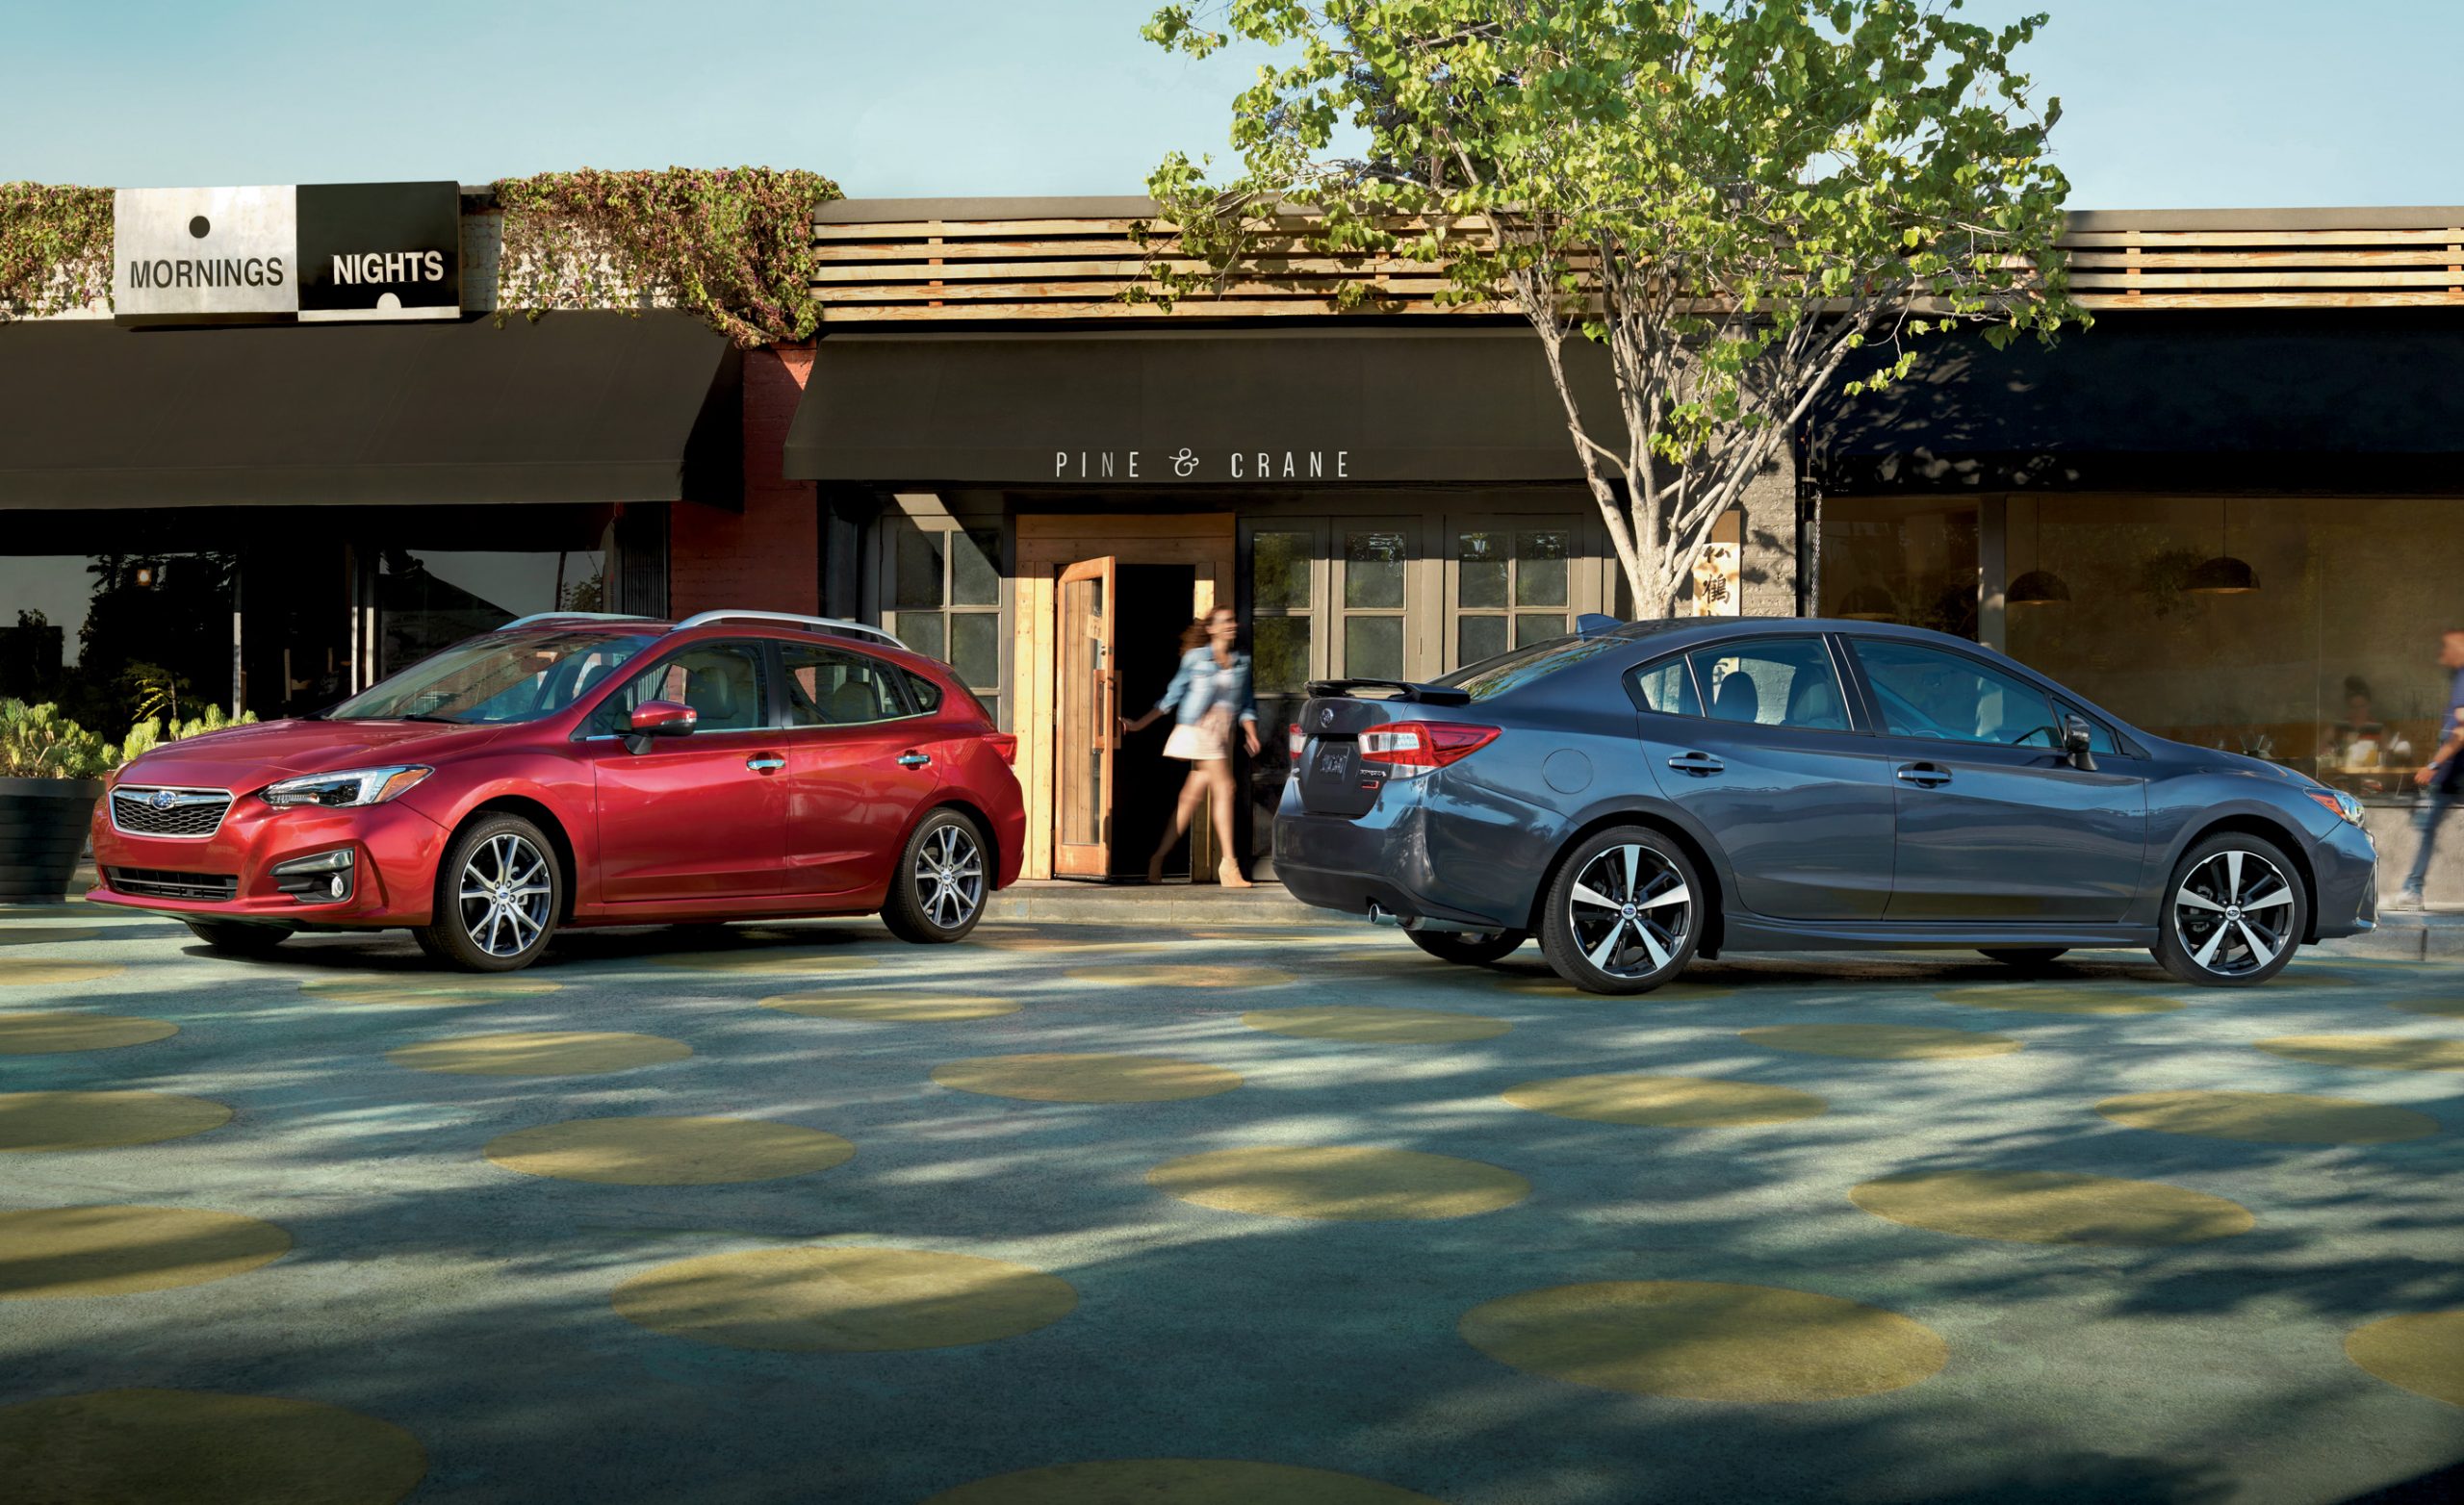 A pair of Subaru Impreza models, one a station wagon and the other a sedan